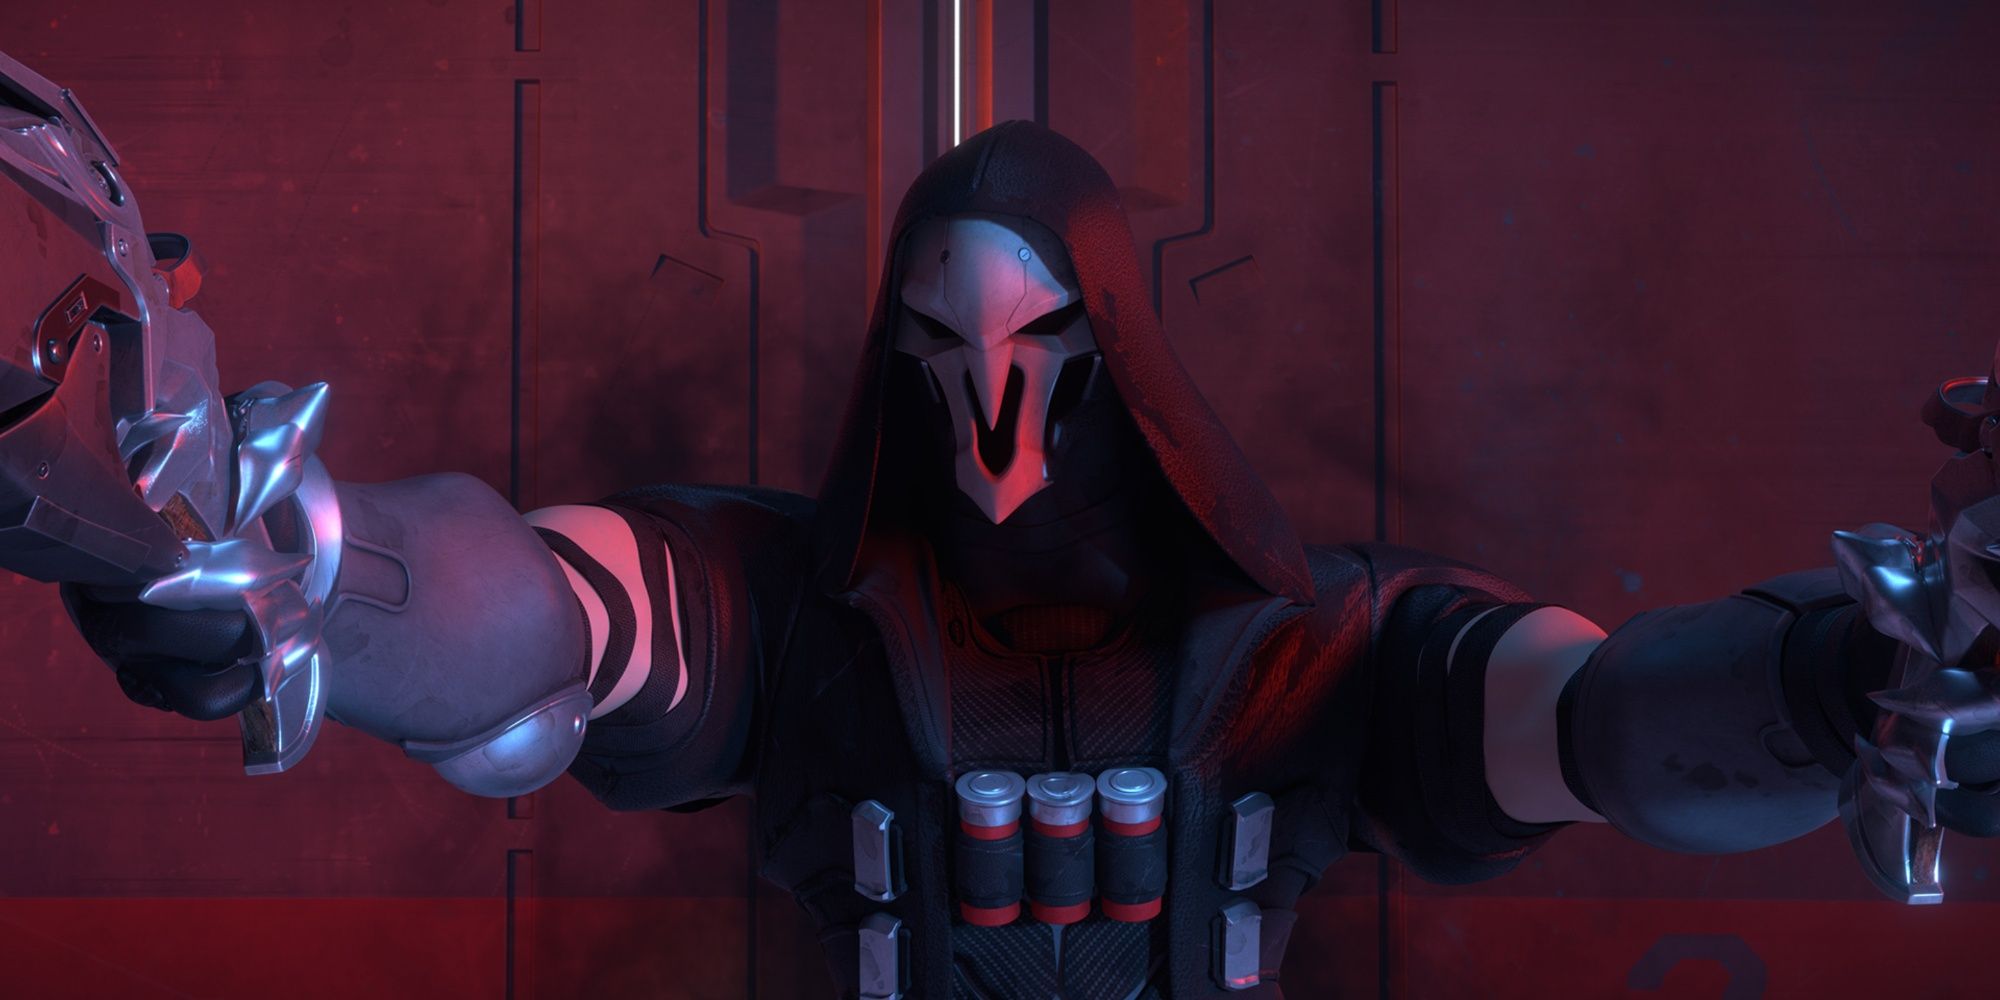 Overwatch 2 Reaper back against the wall, shotguns in hand.